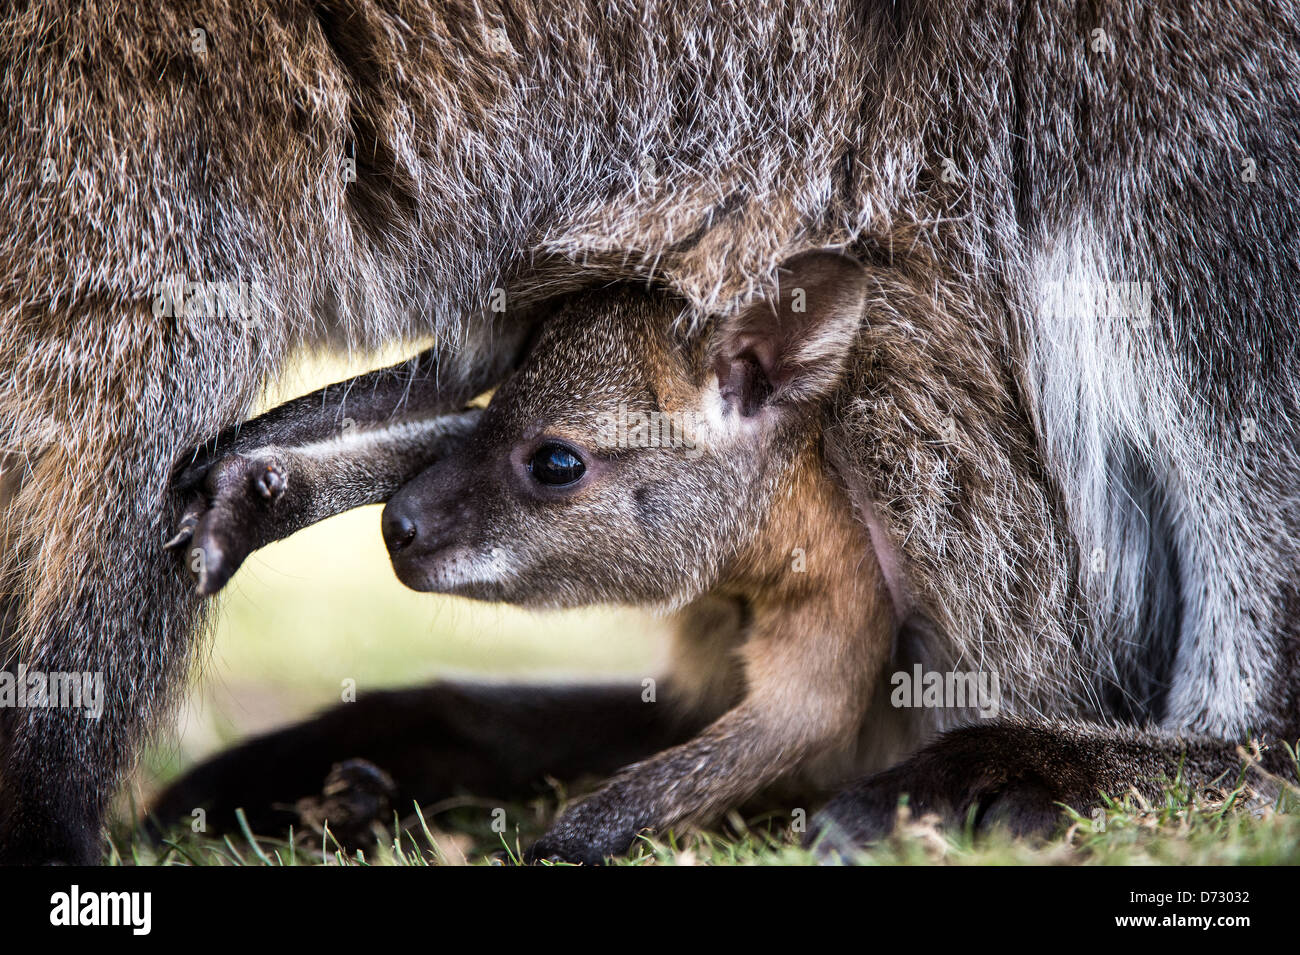 baby wallaby emerging from mother's pouch Stock Photo